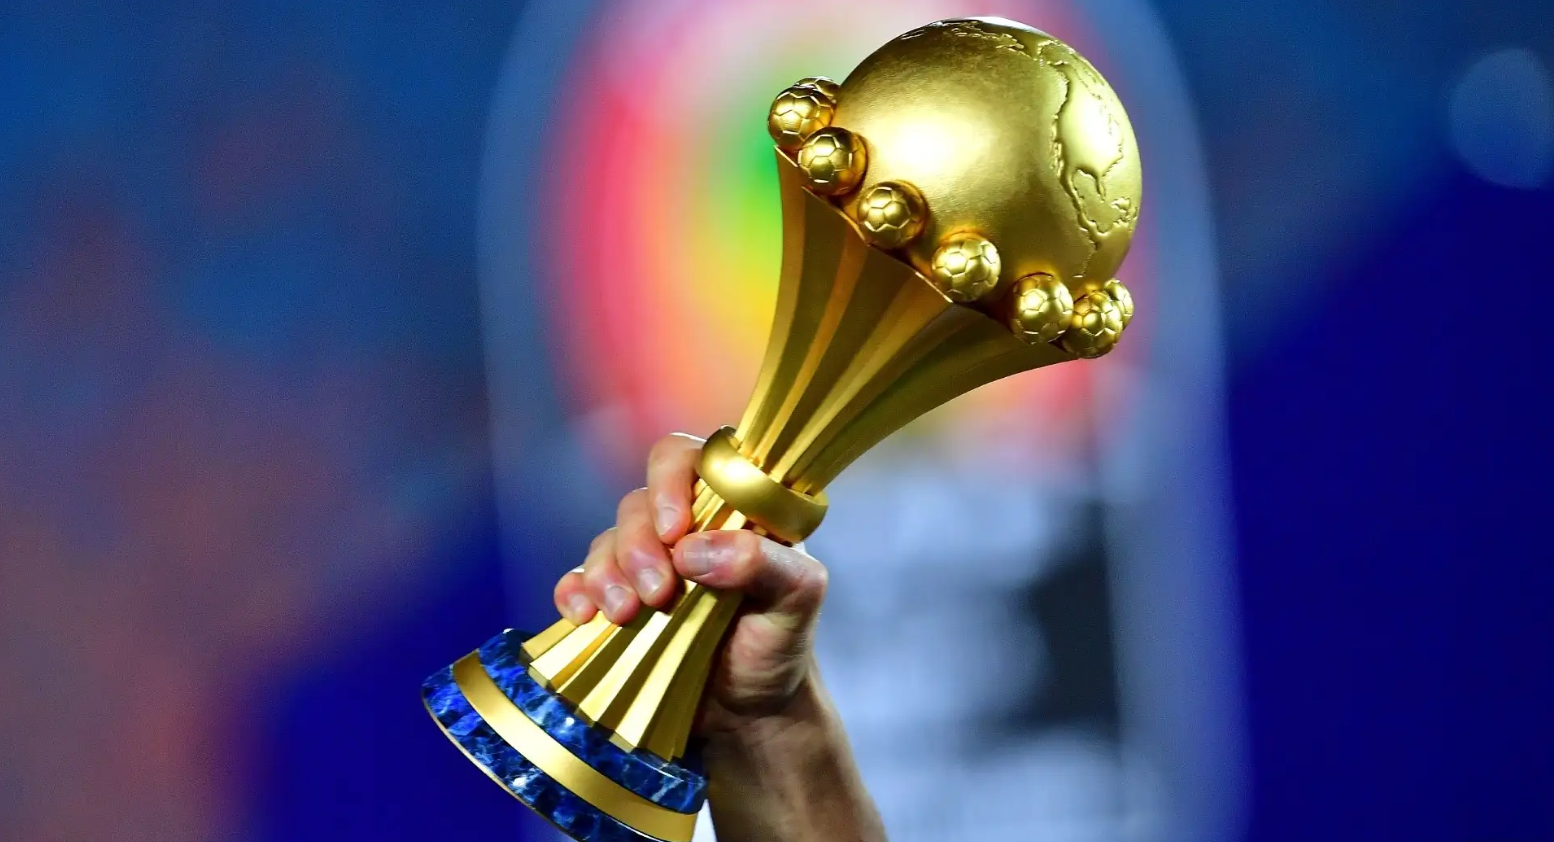 Next edition of AFCON could be postponed to early 2026